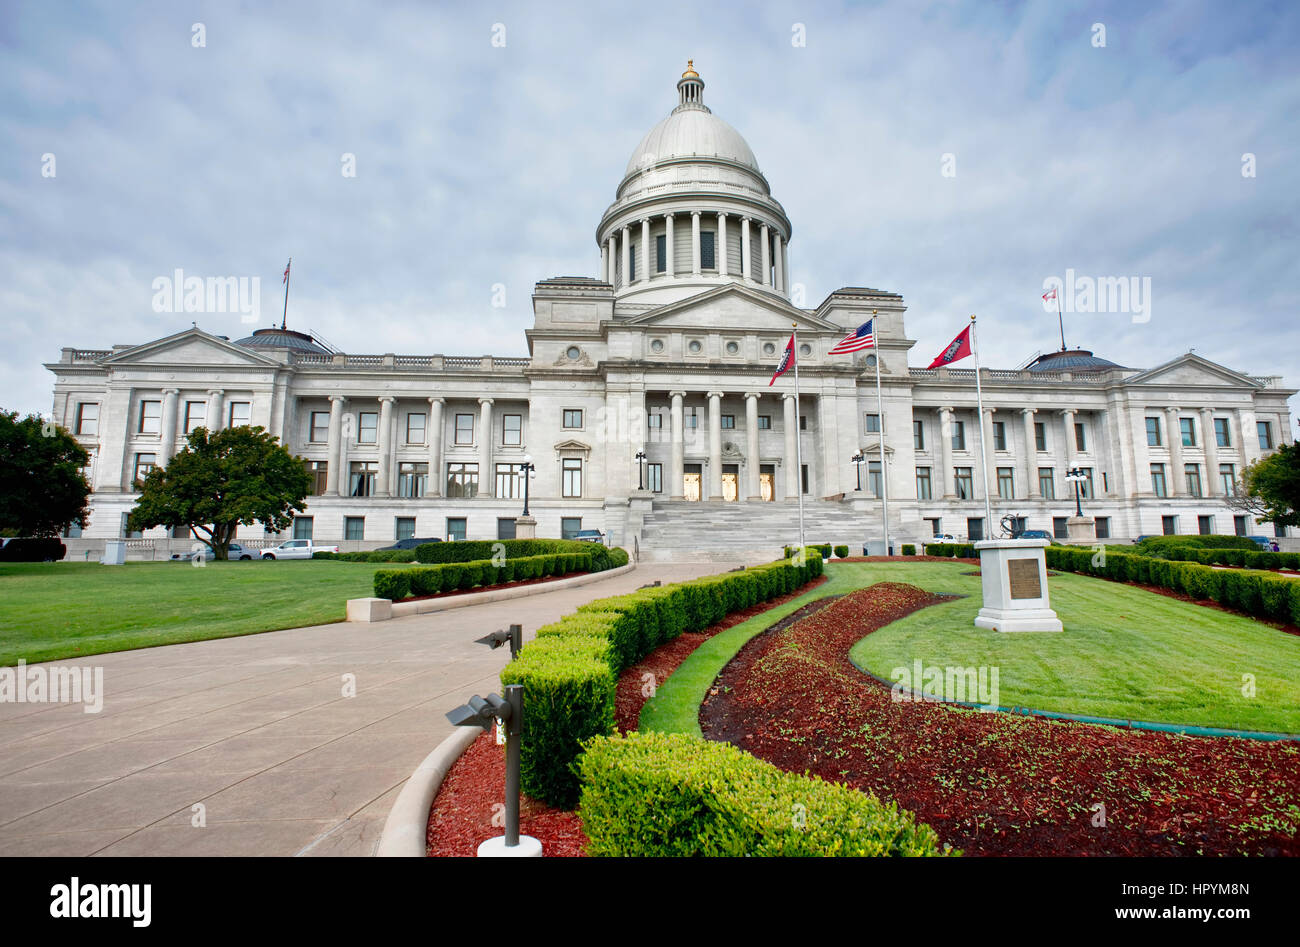 Front view of the State Capital of Arkansas, in Little Rock Arkansas. Stock Photo